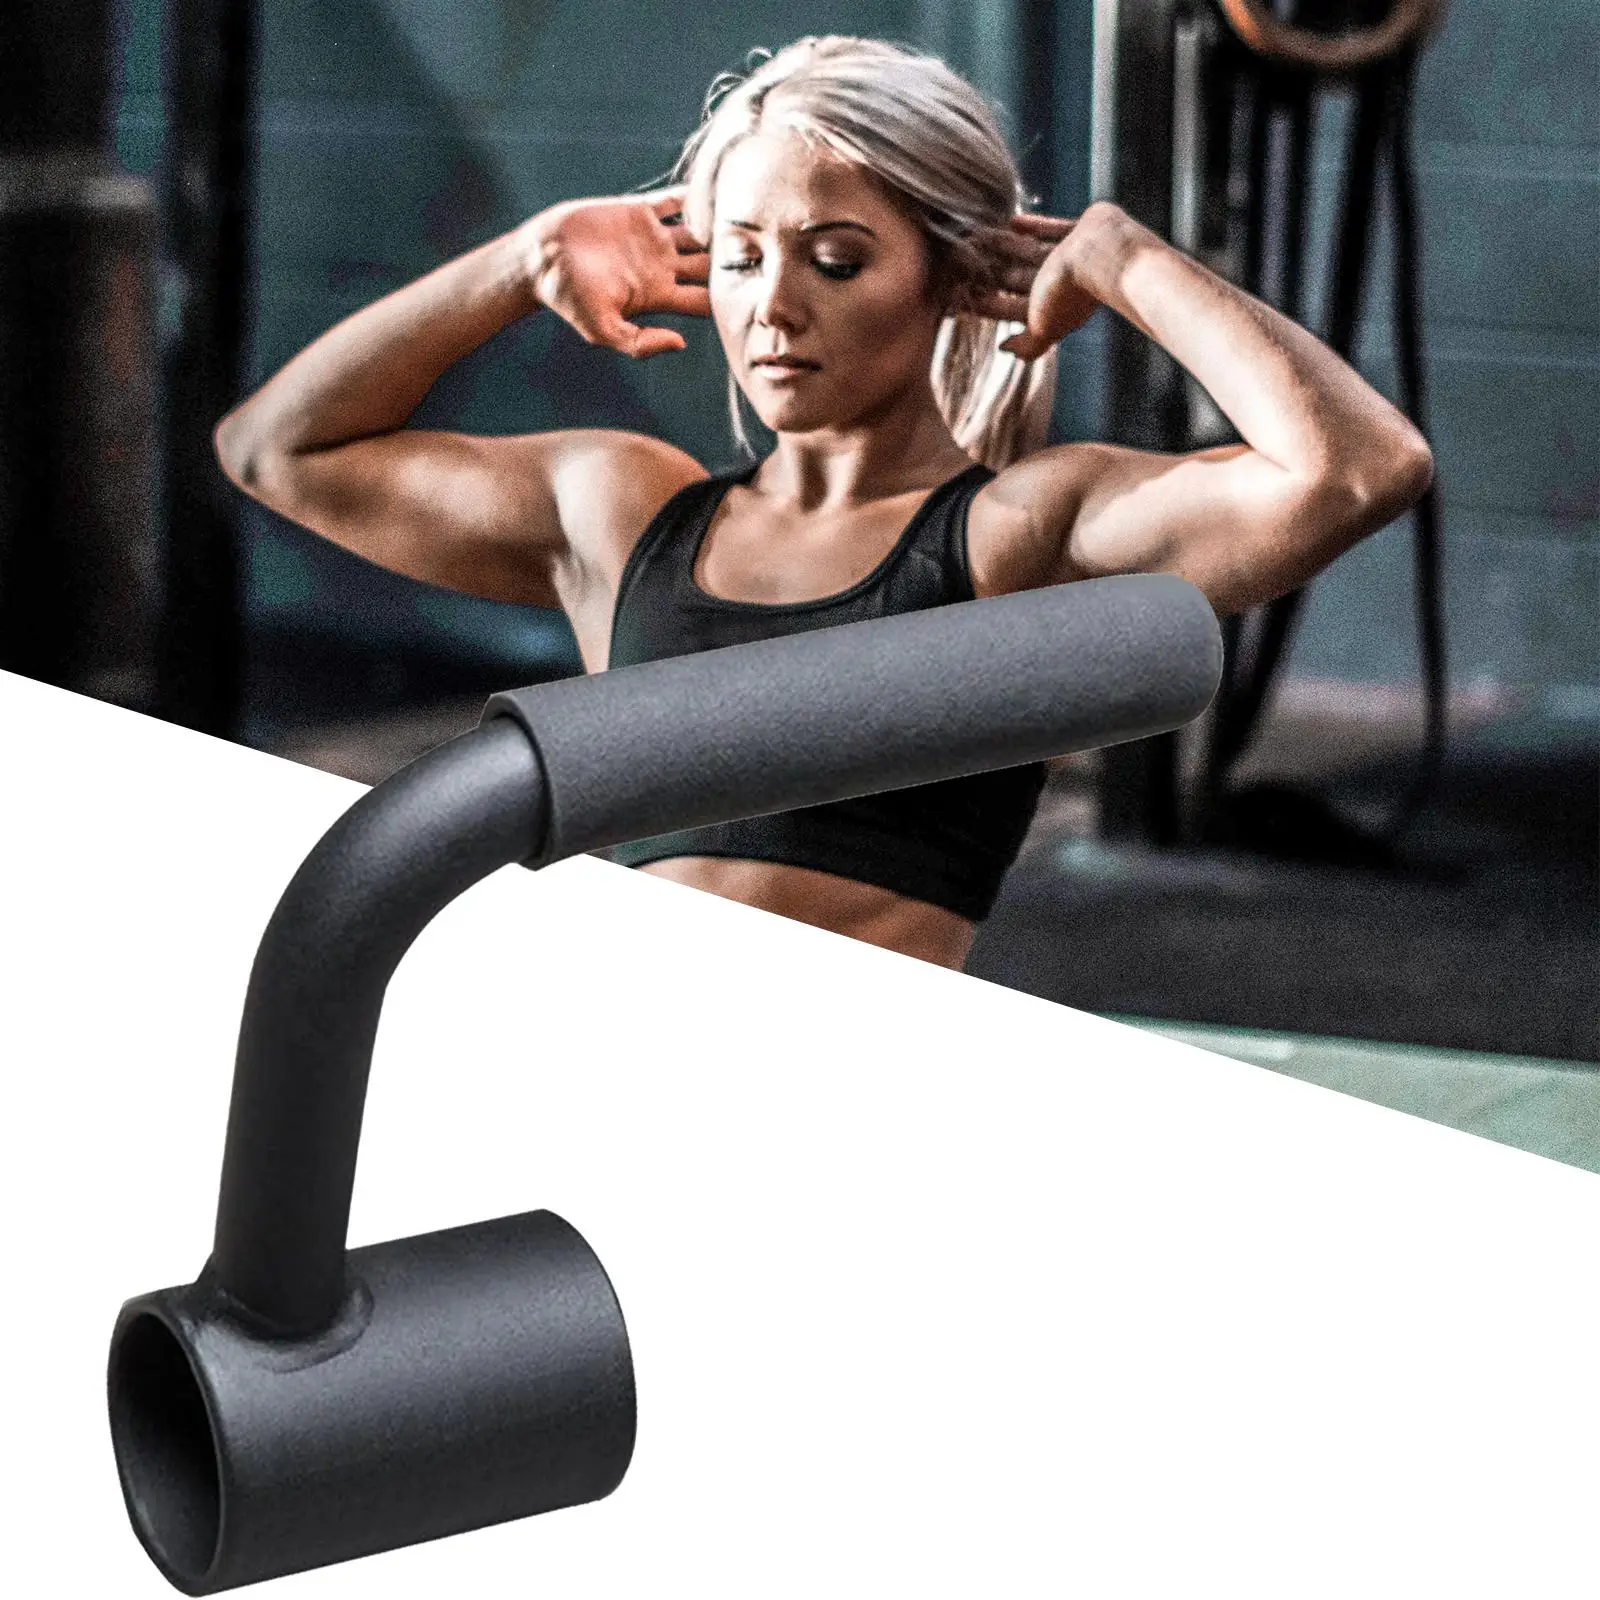 Portable T Bar Row Attachment Barbell Attachment Easy to Install Barbell Barrel Rack for Workout Strength Training Equipment